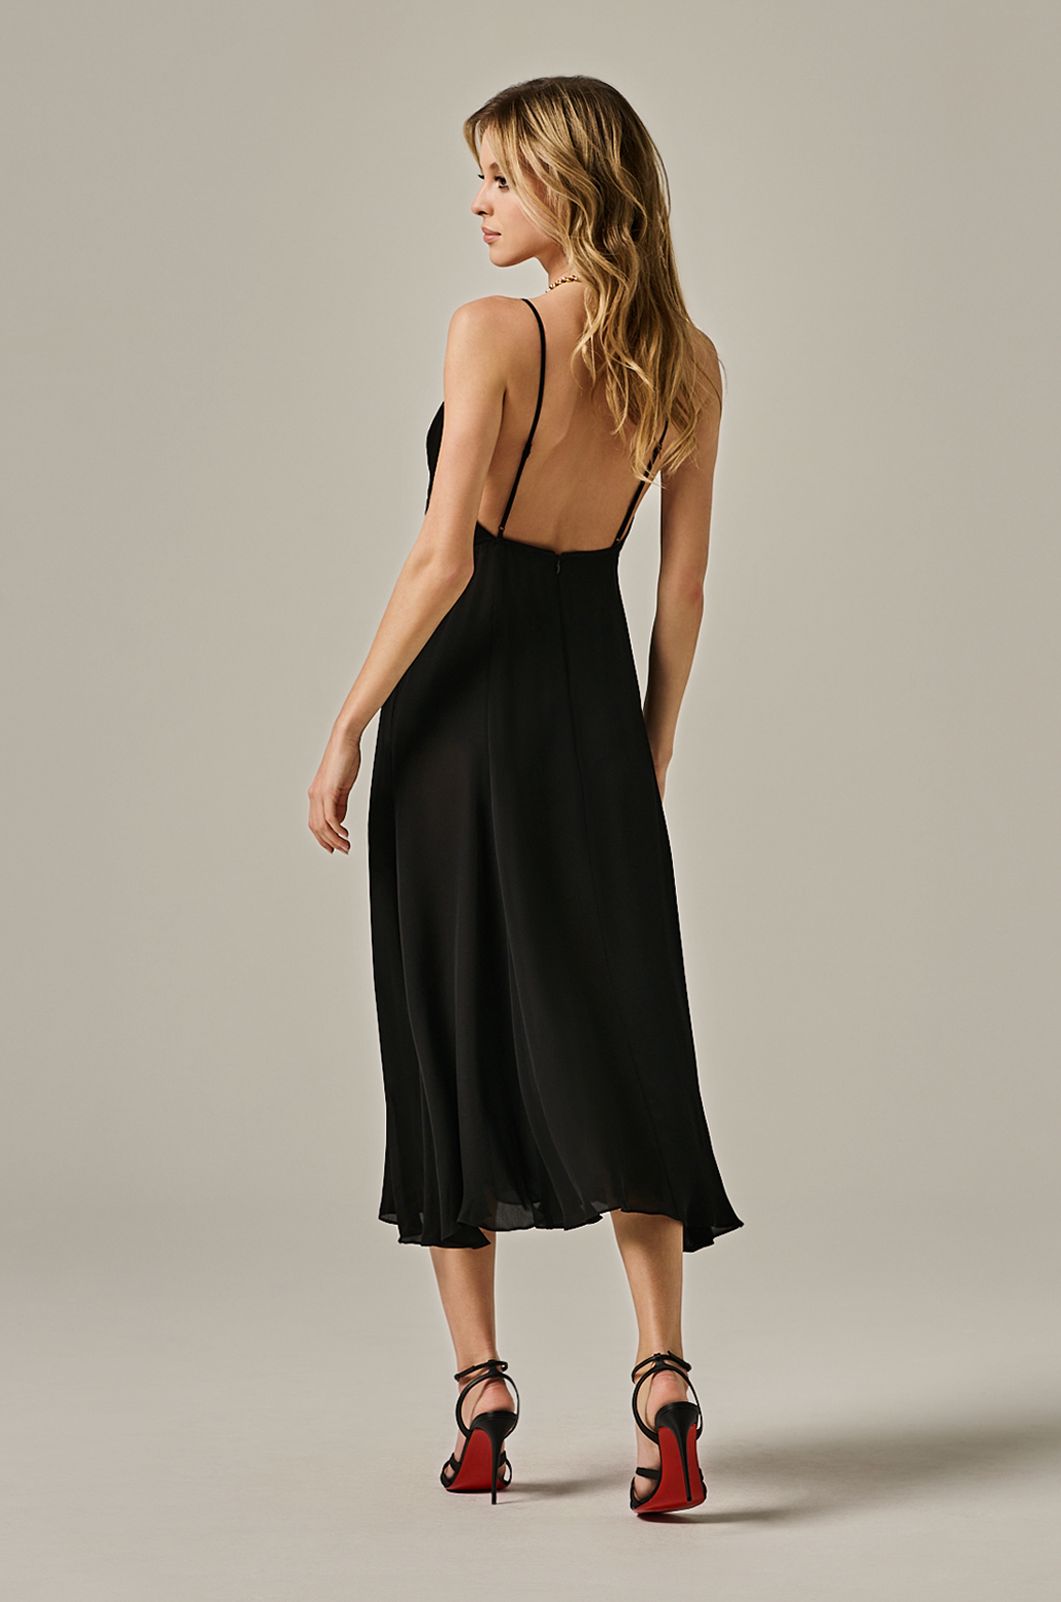 calf length flowy dress with deep plunge line at chest. double layered dress and exposed back